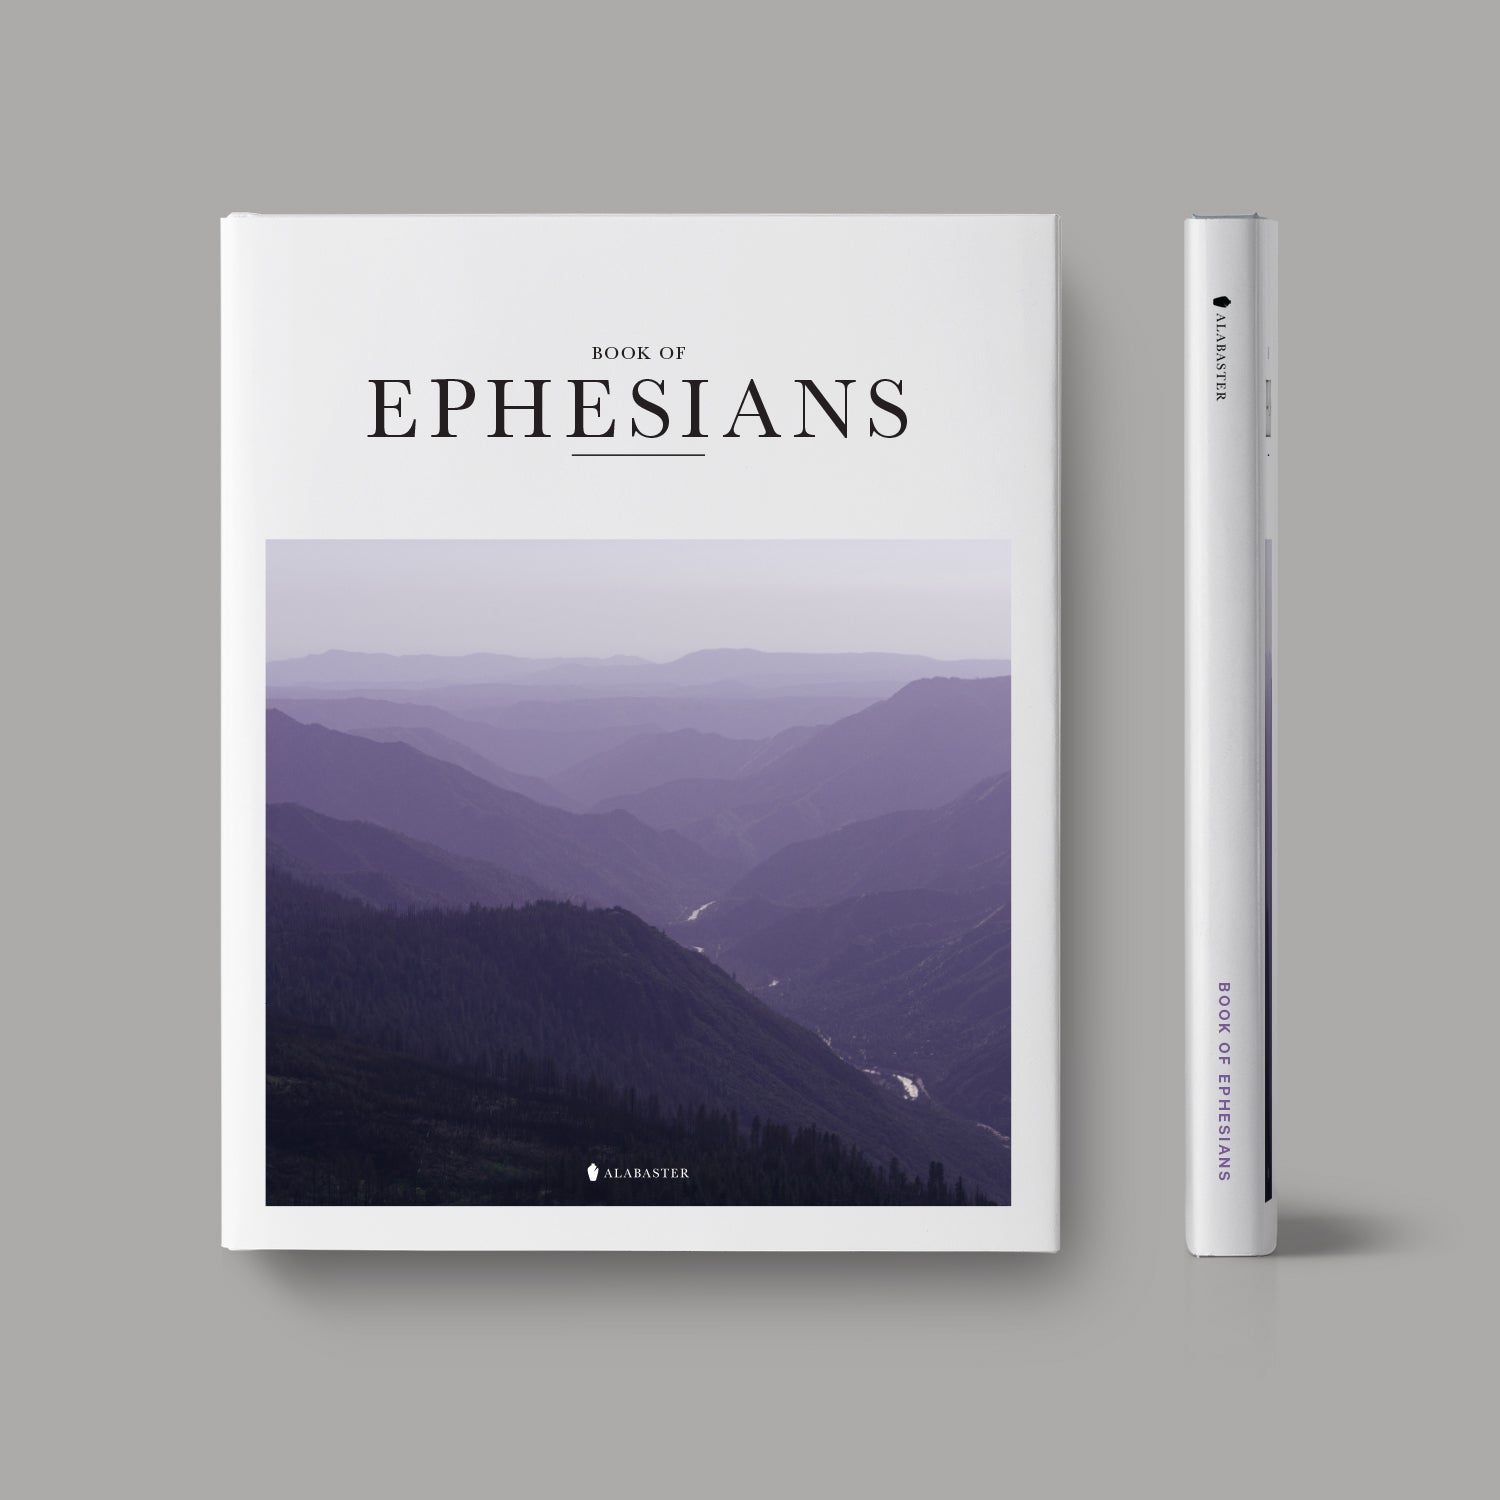 The Book of Ephesians hardcover